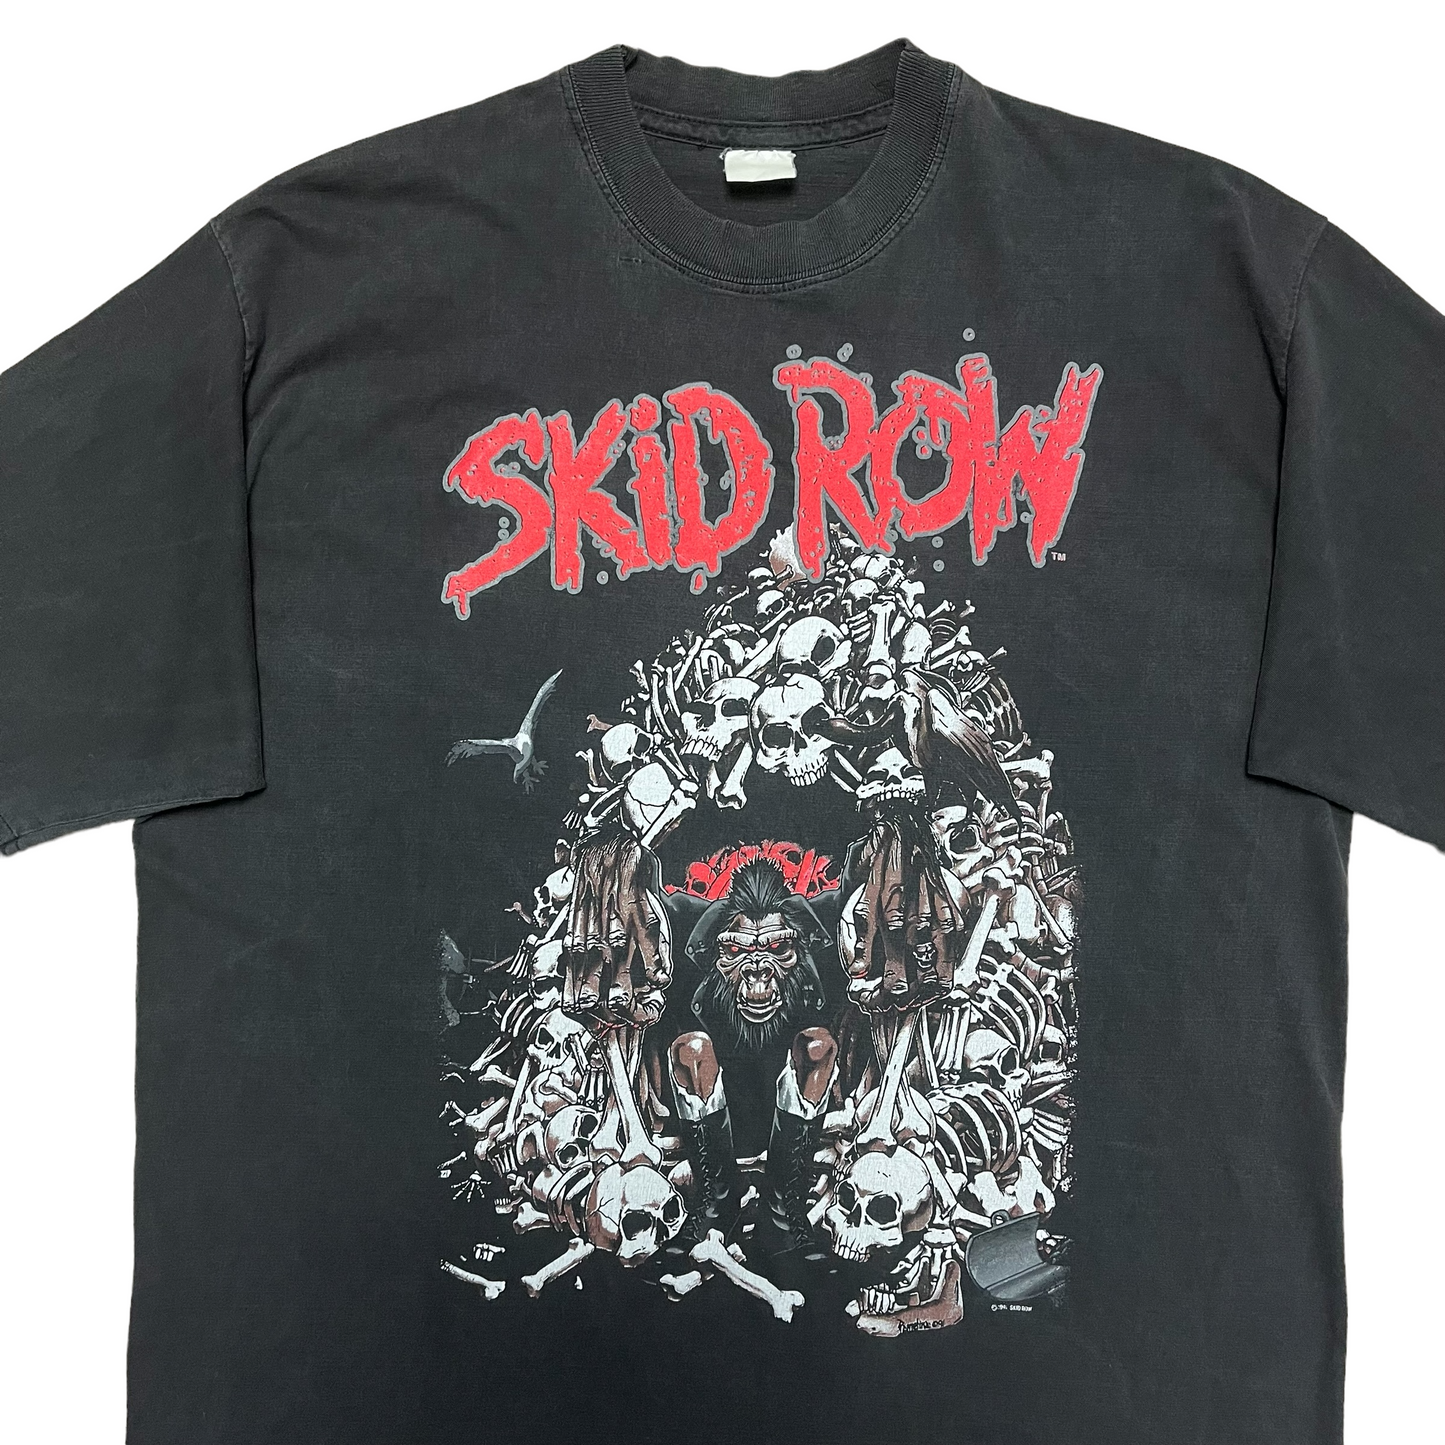 1991 Skid Row ‘Slave to the Grind’ (XL)